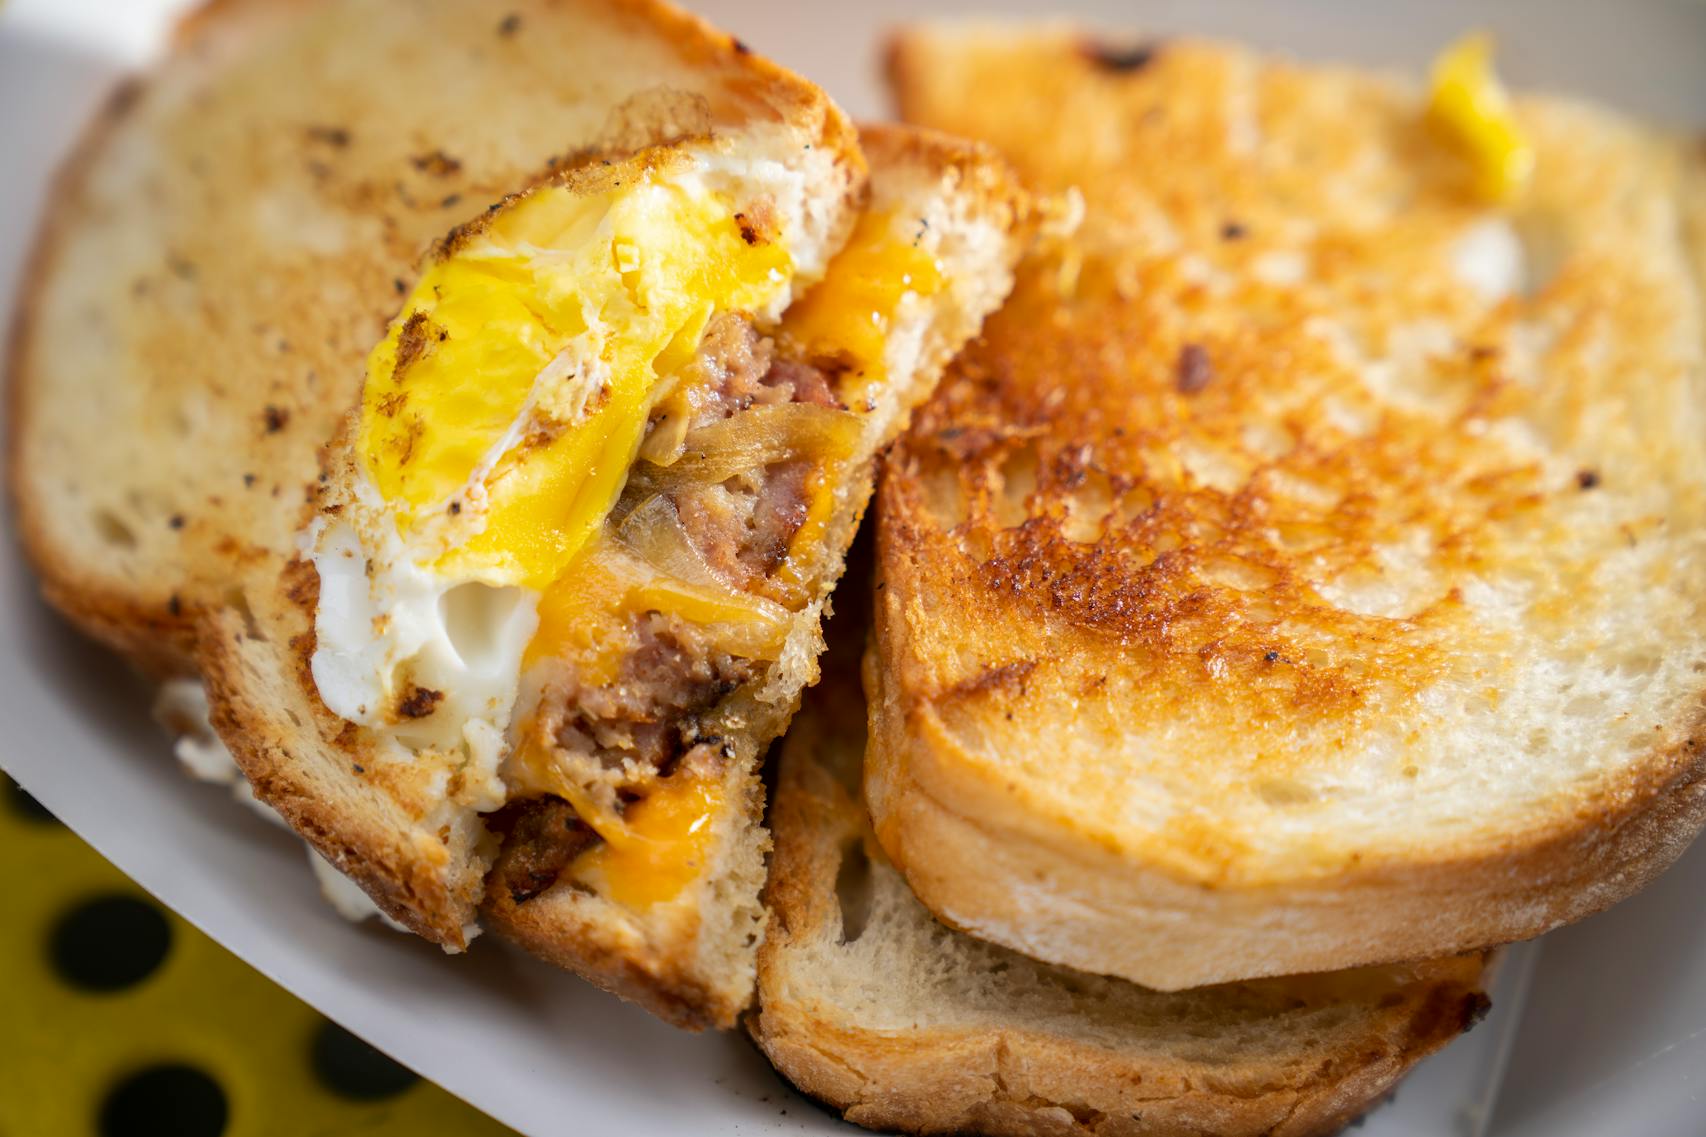 Holey Hamloaf Breakfast Sandwich from Hamline Church Dining Hall. The new foods of the 2023 Minnesota State Fair photographed on the first day of the fair in Falcon Heights, Minn. on Tuesday, Aug. 8, 2023. ] LEILA NAVIDI • leila.navidi@startribune.com